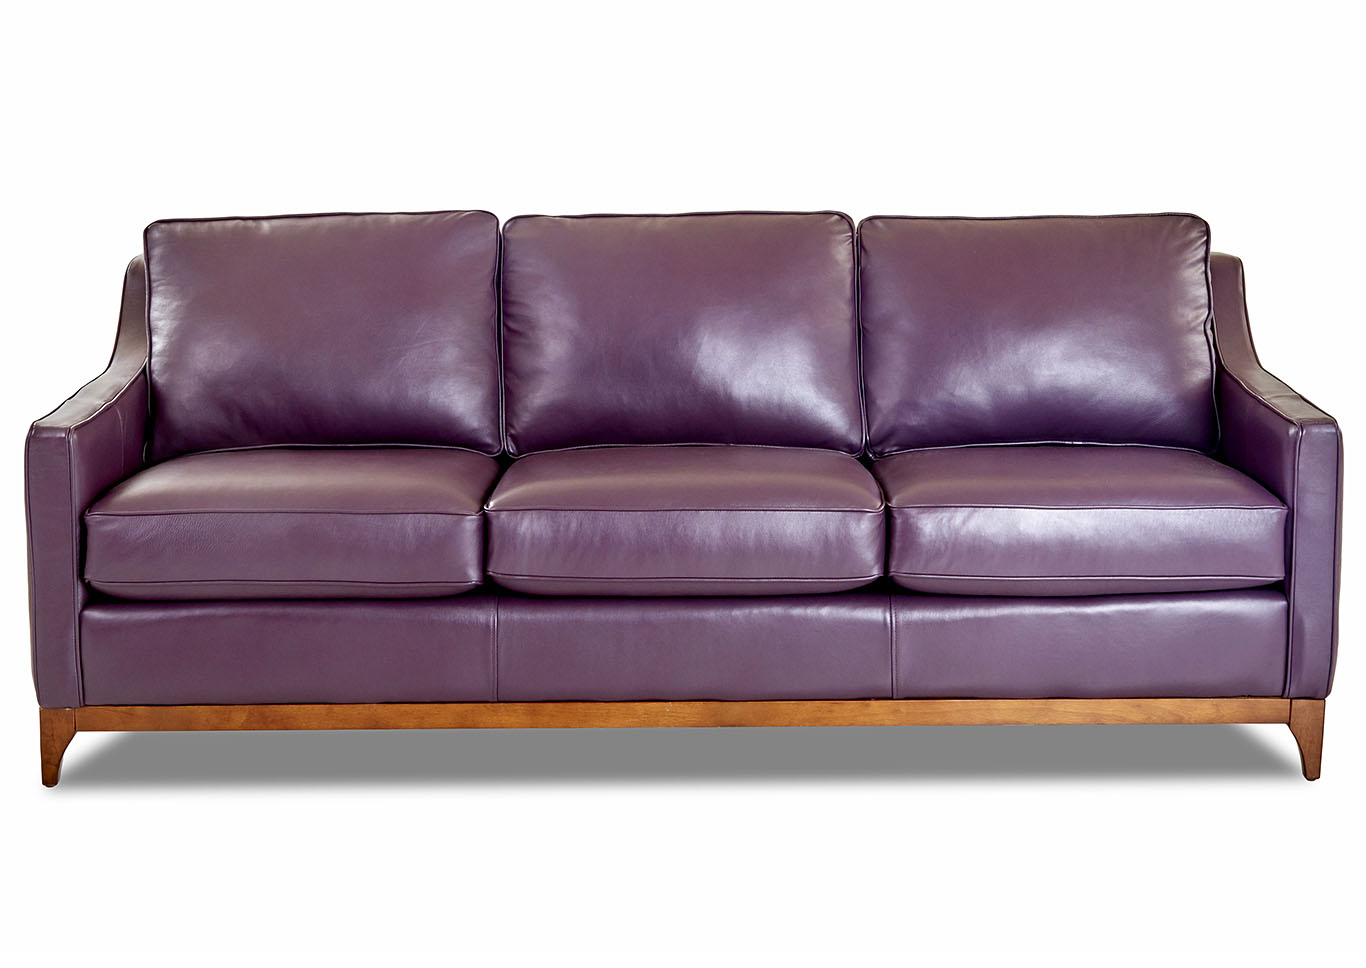 Anson Leather Stationary Sofa,Klaussner Home Furnishings